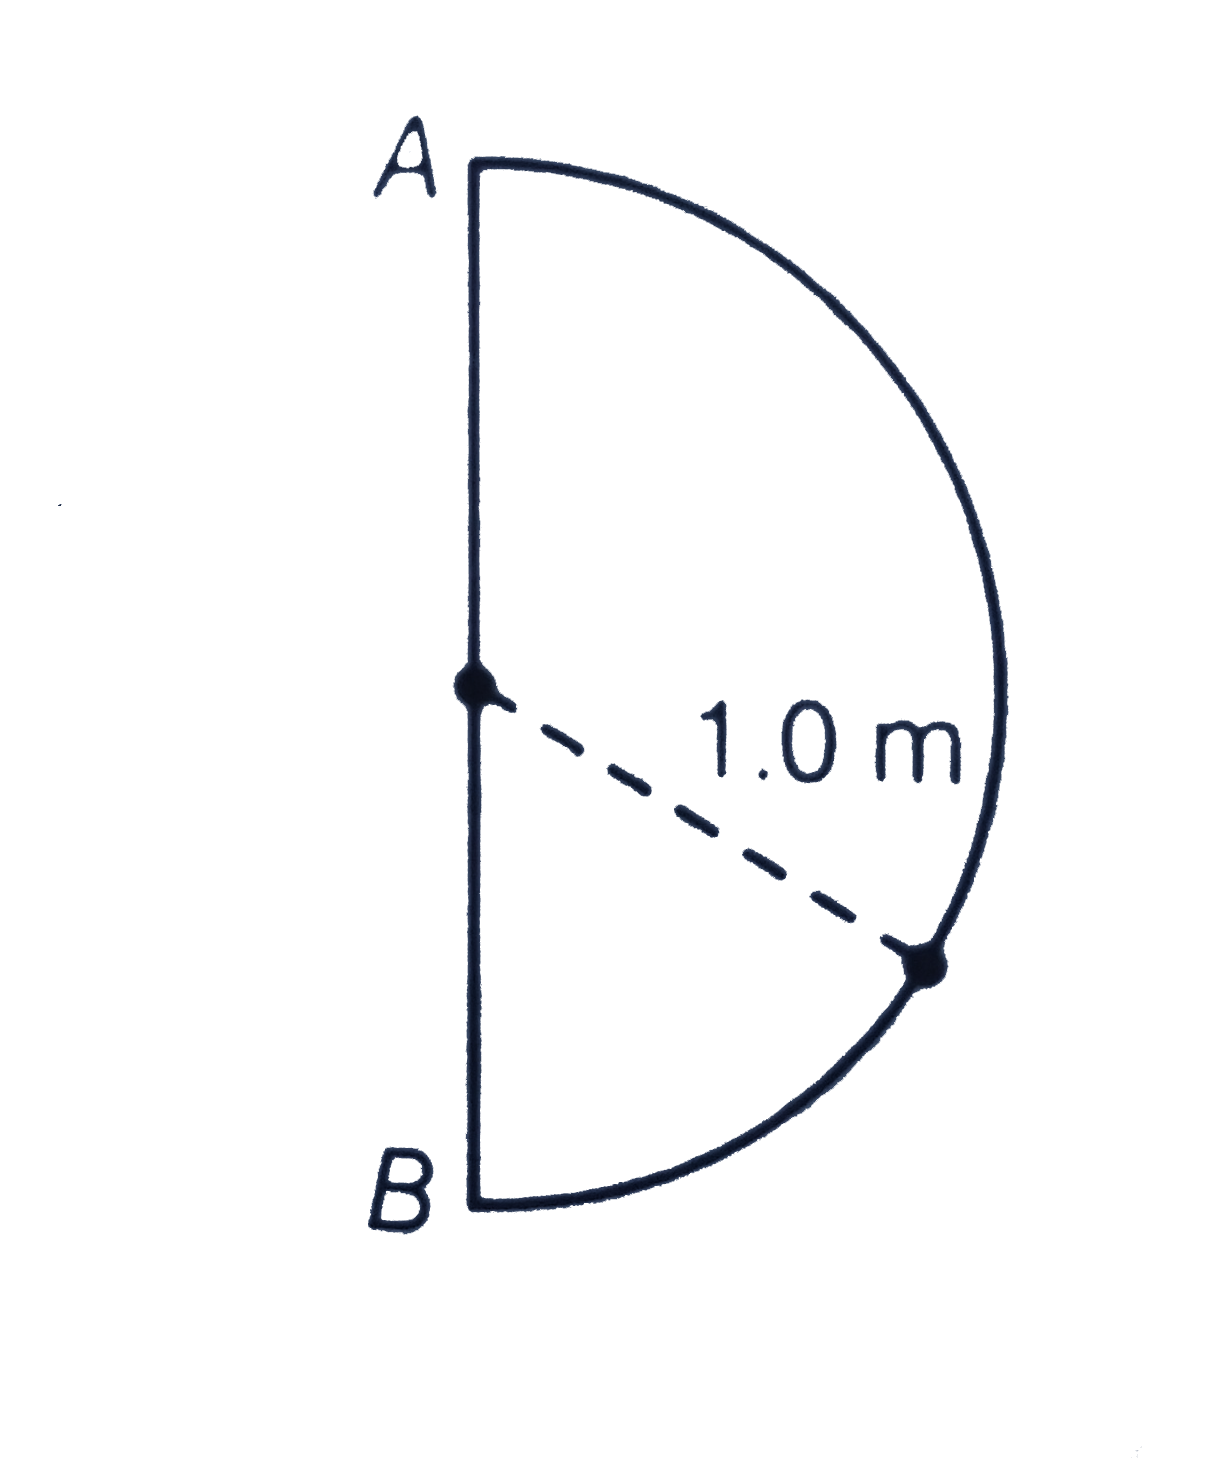 In one second, a particle goes from point A to point B moving in a semicircle (Fig). Find the magnitude of the average velocity.